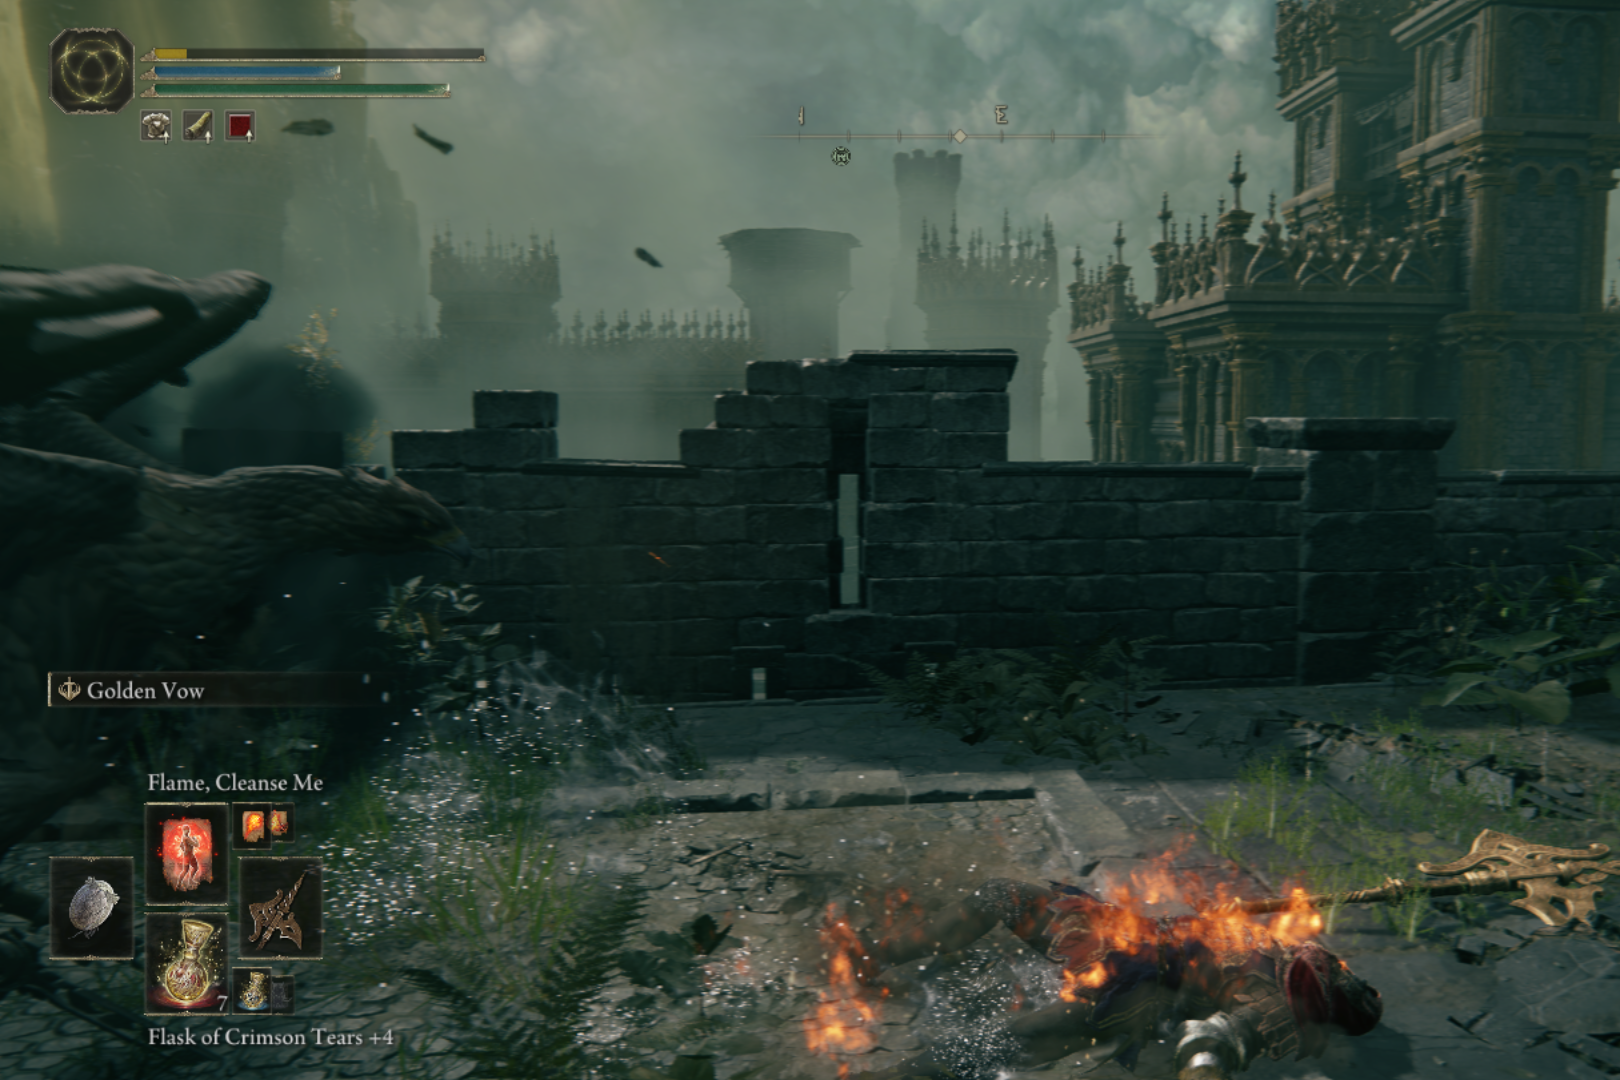 Screengrab of a man lying on the grounds of a castle burning to death